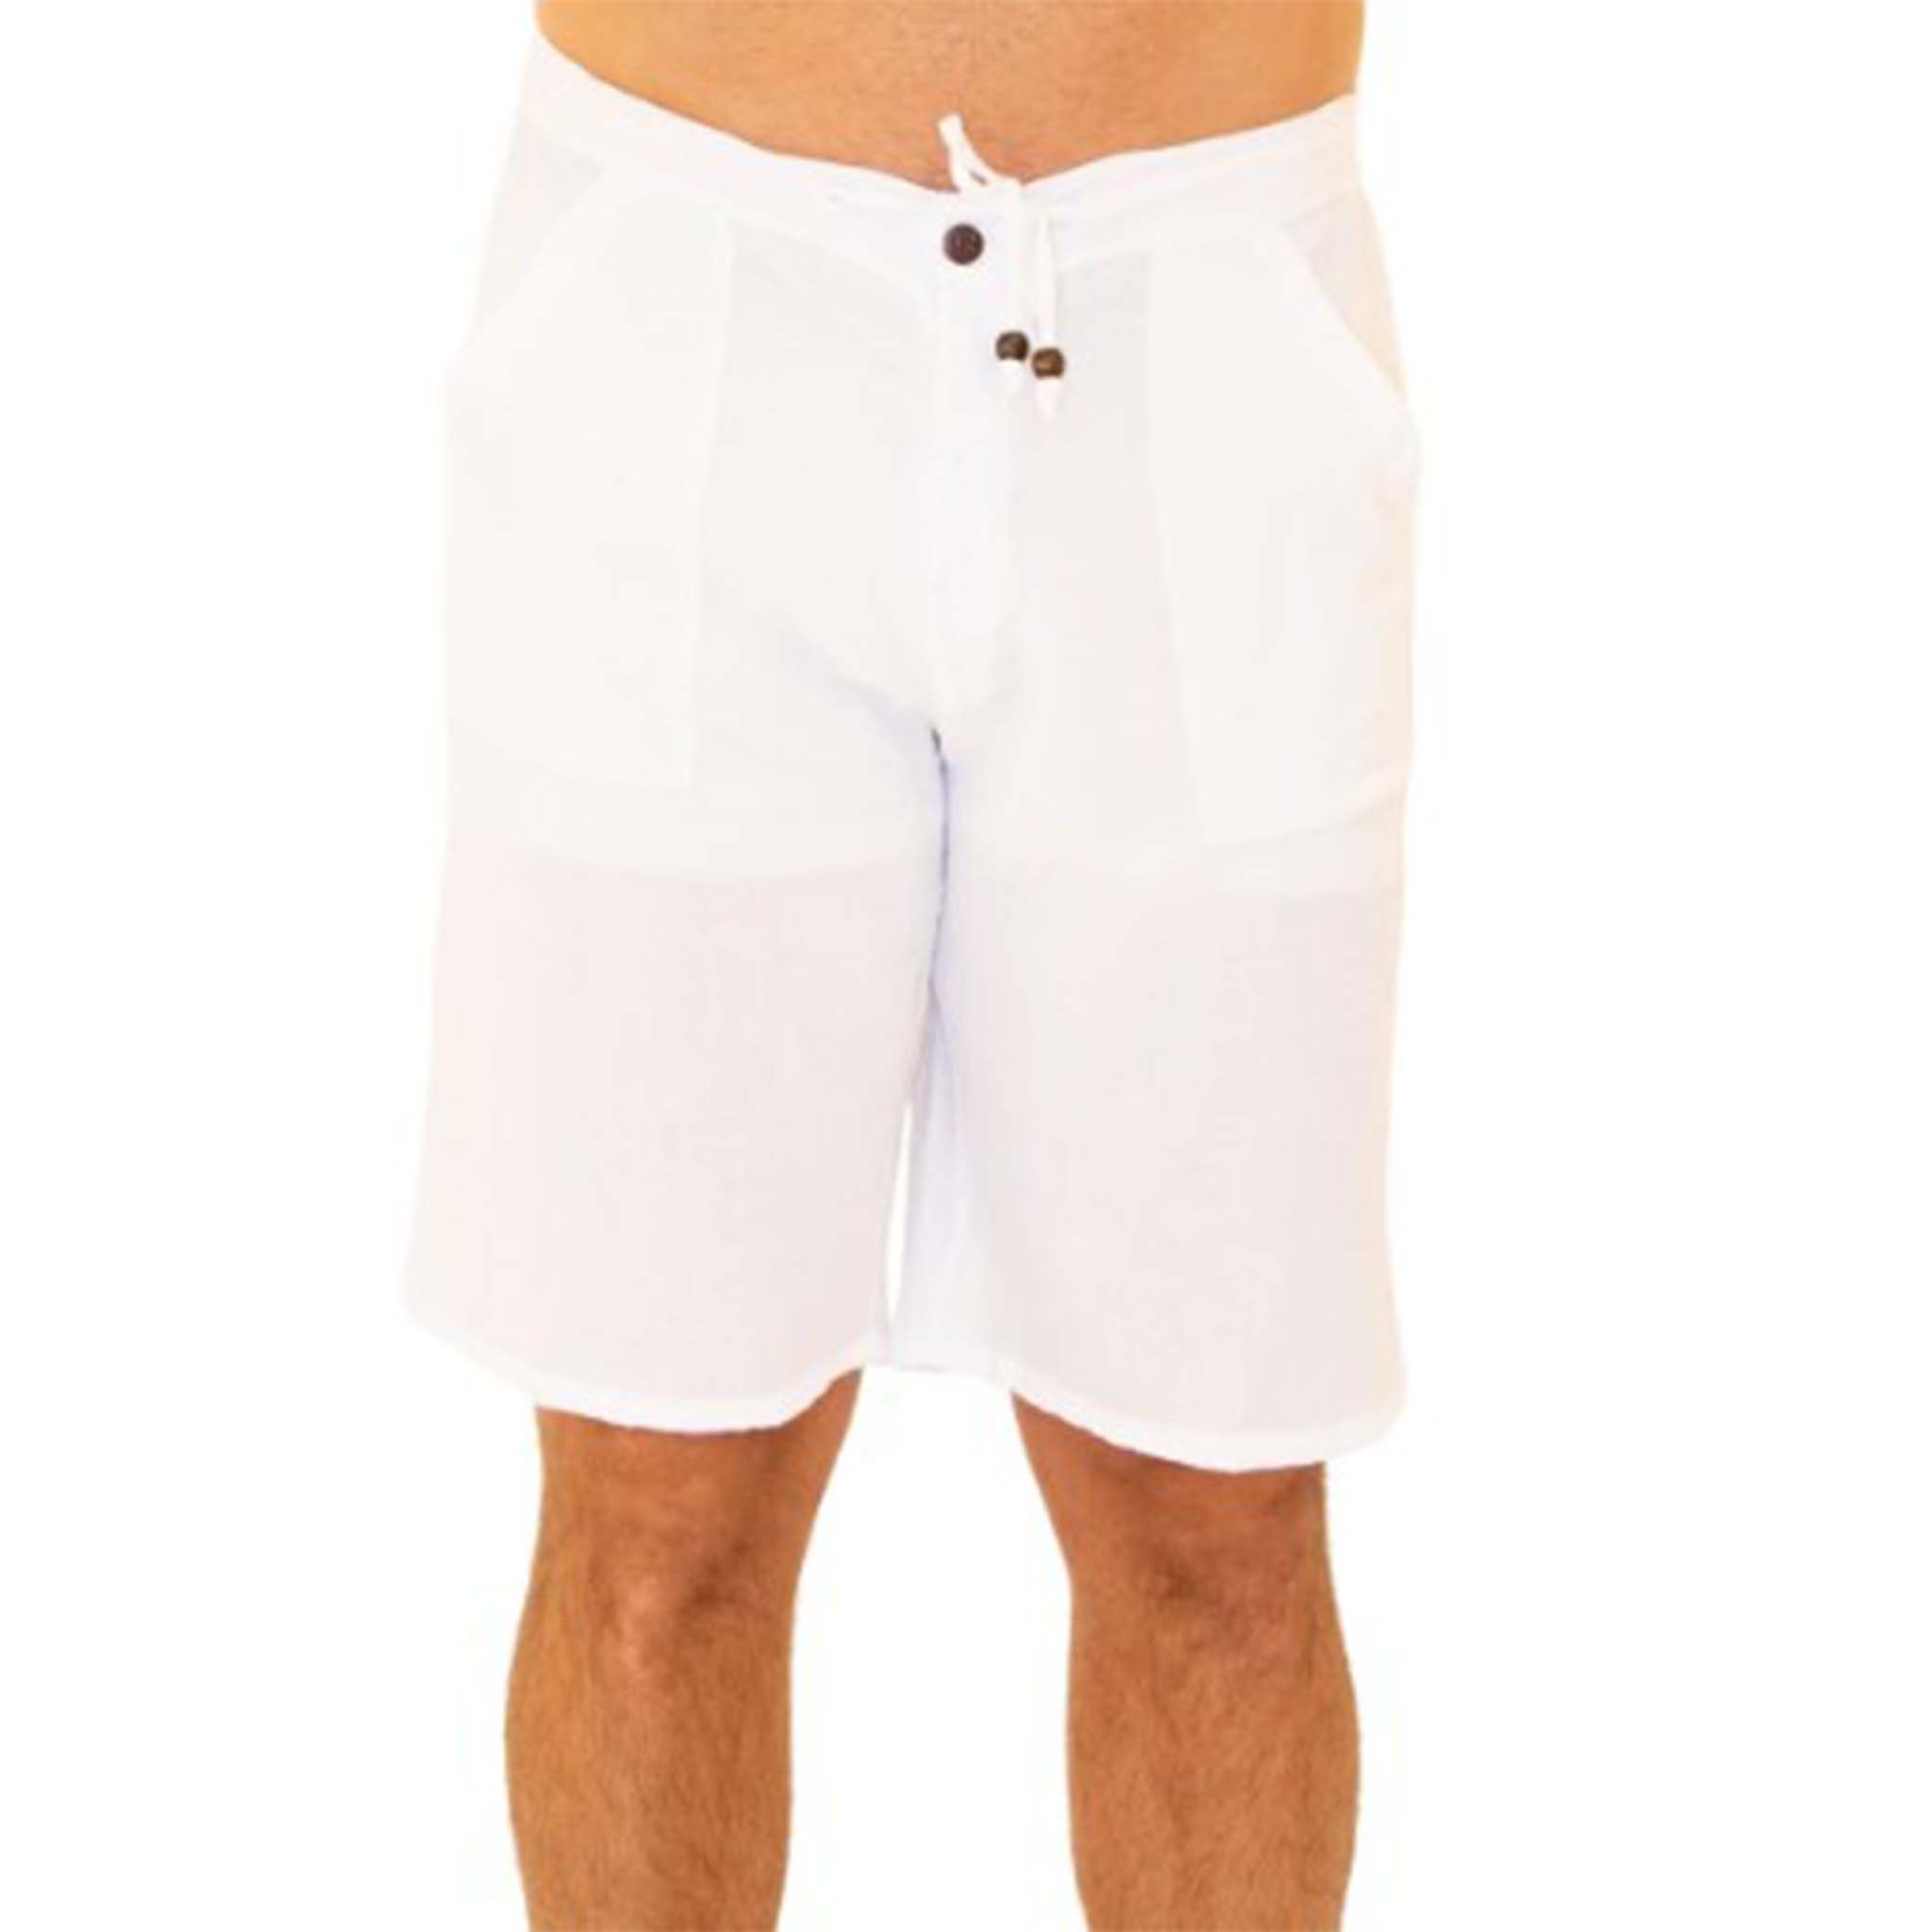 White Resort Wear Shorts - Lightweight, comfortable and stylish men's vacation clothing perfect for resort and beach settings.